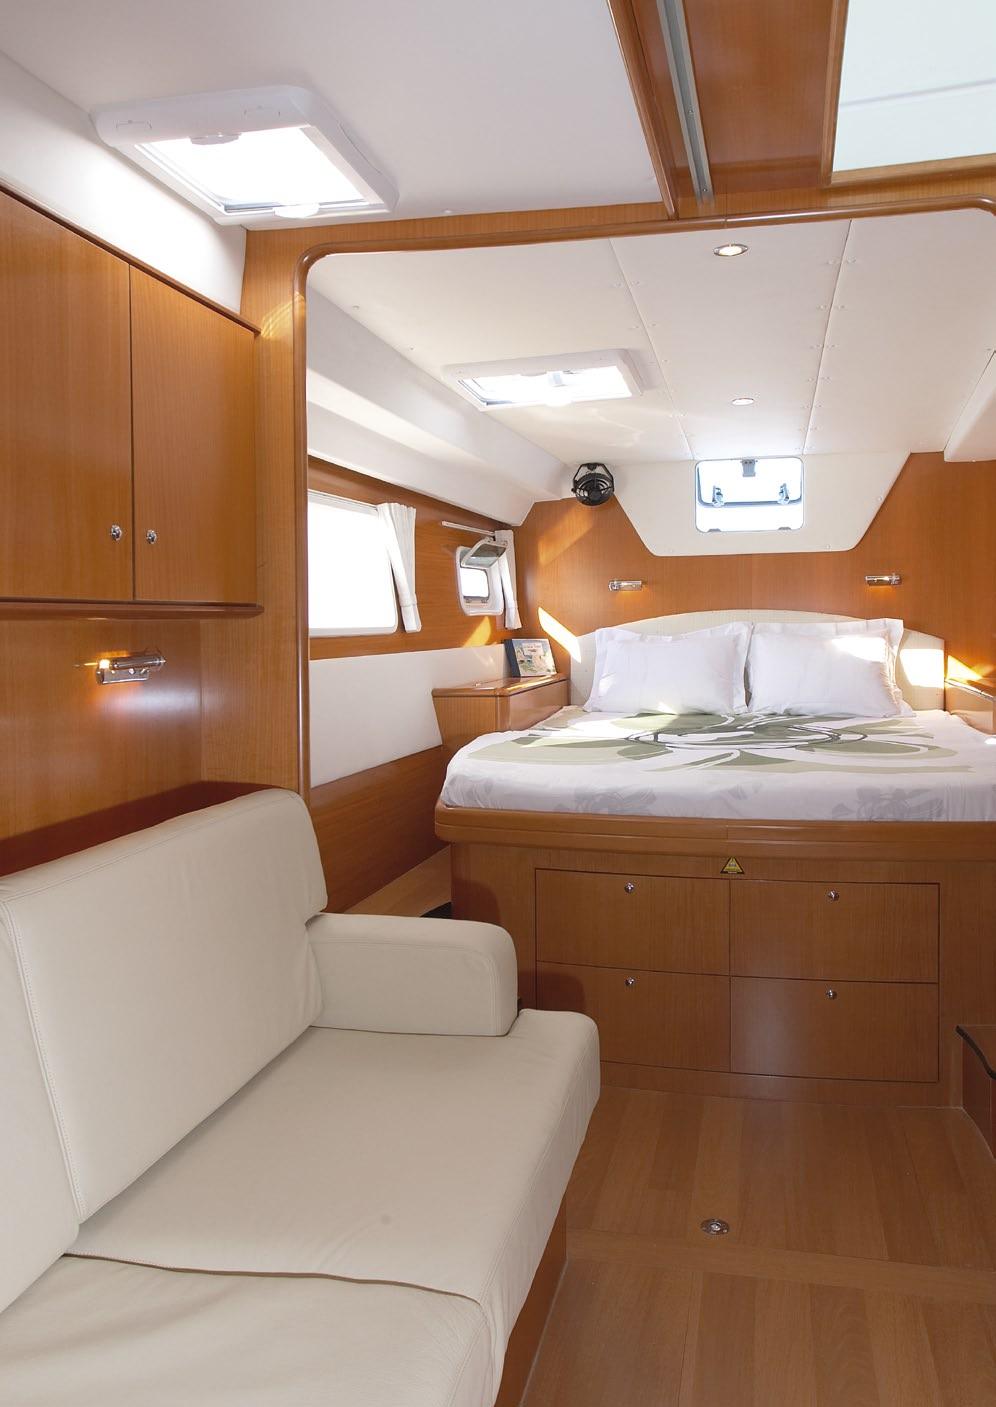 Three-cabin owner s version: A vast owner s cabin with a separate entrance, a small salon, a desk, a dressing room, abundant storage space and a fully equipped bathroom with a separate shower